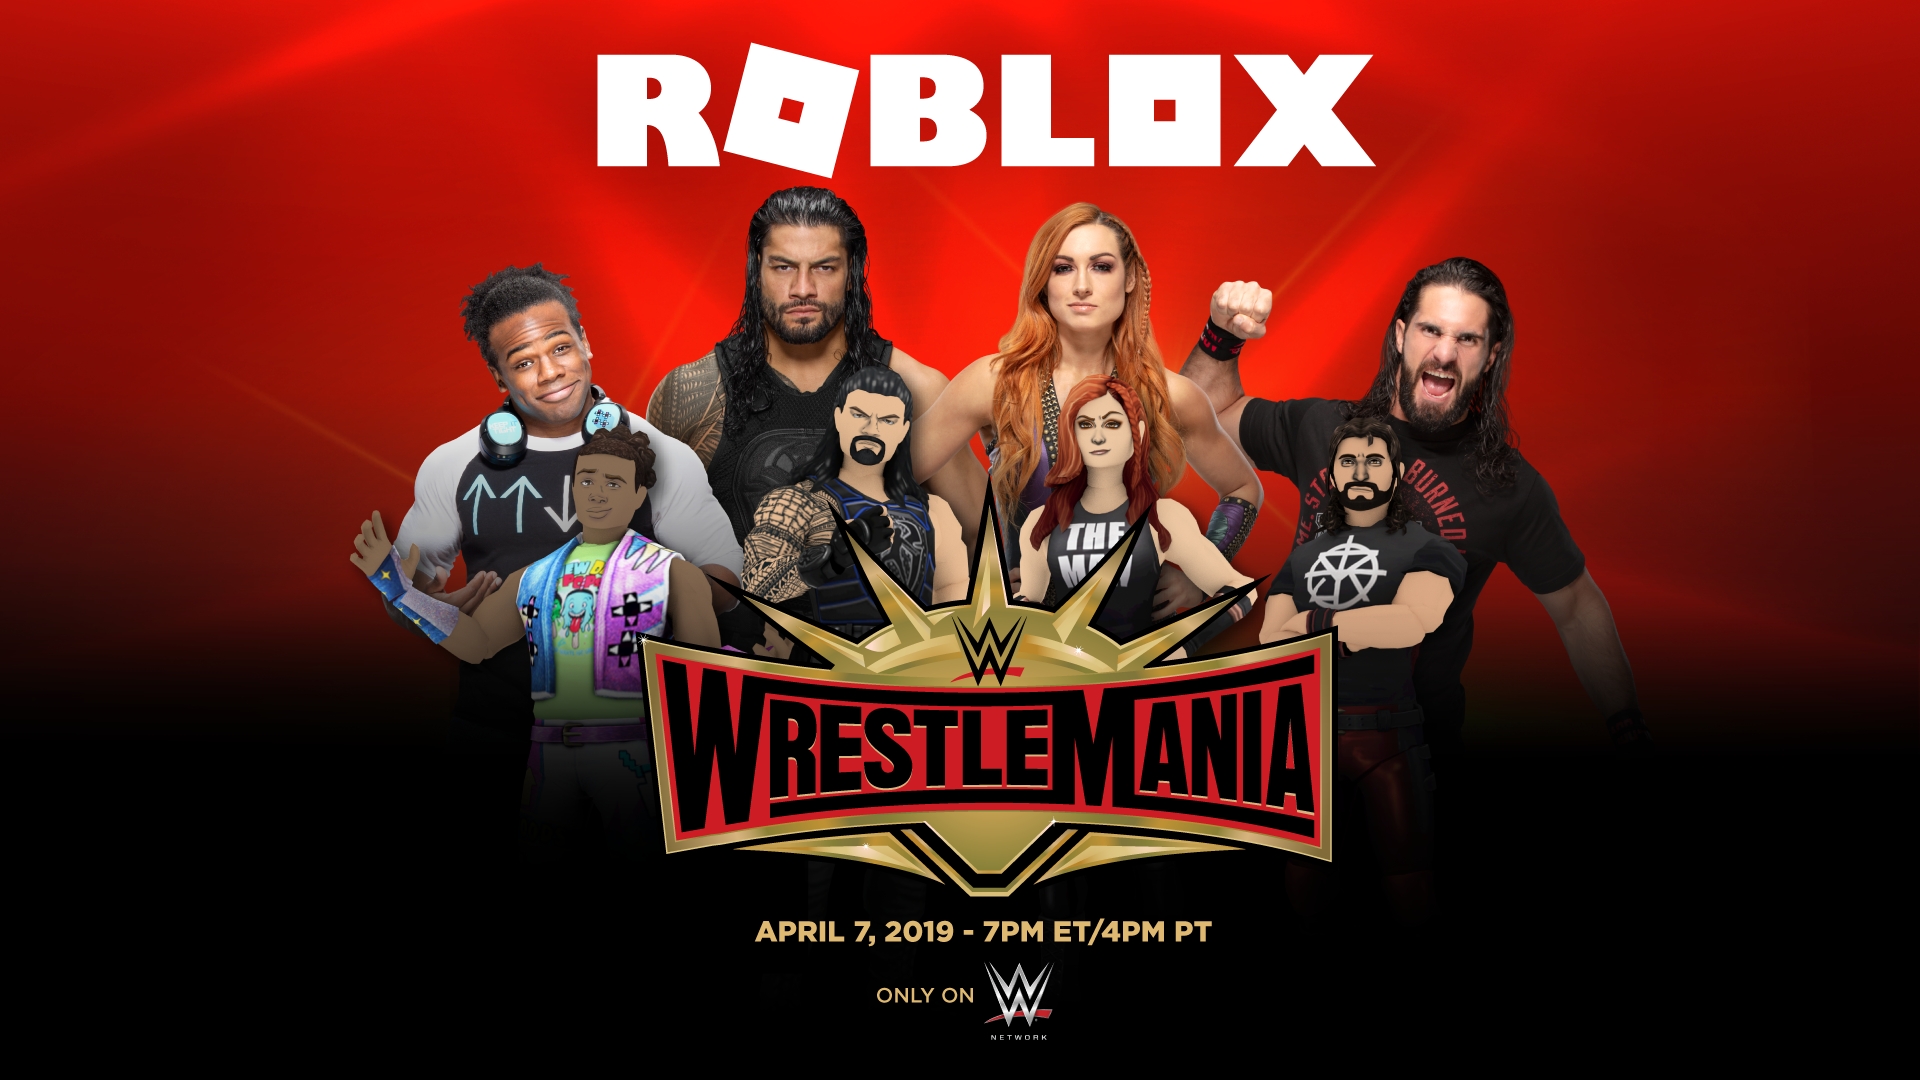 Roblox And Wwe Partner To Celebrate Wrestlemania Business Wire - roblox download 2019